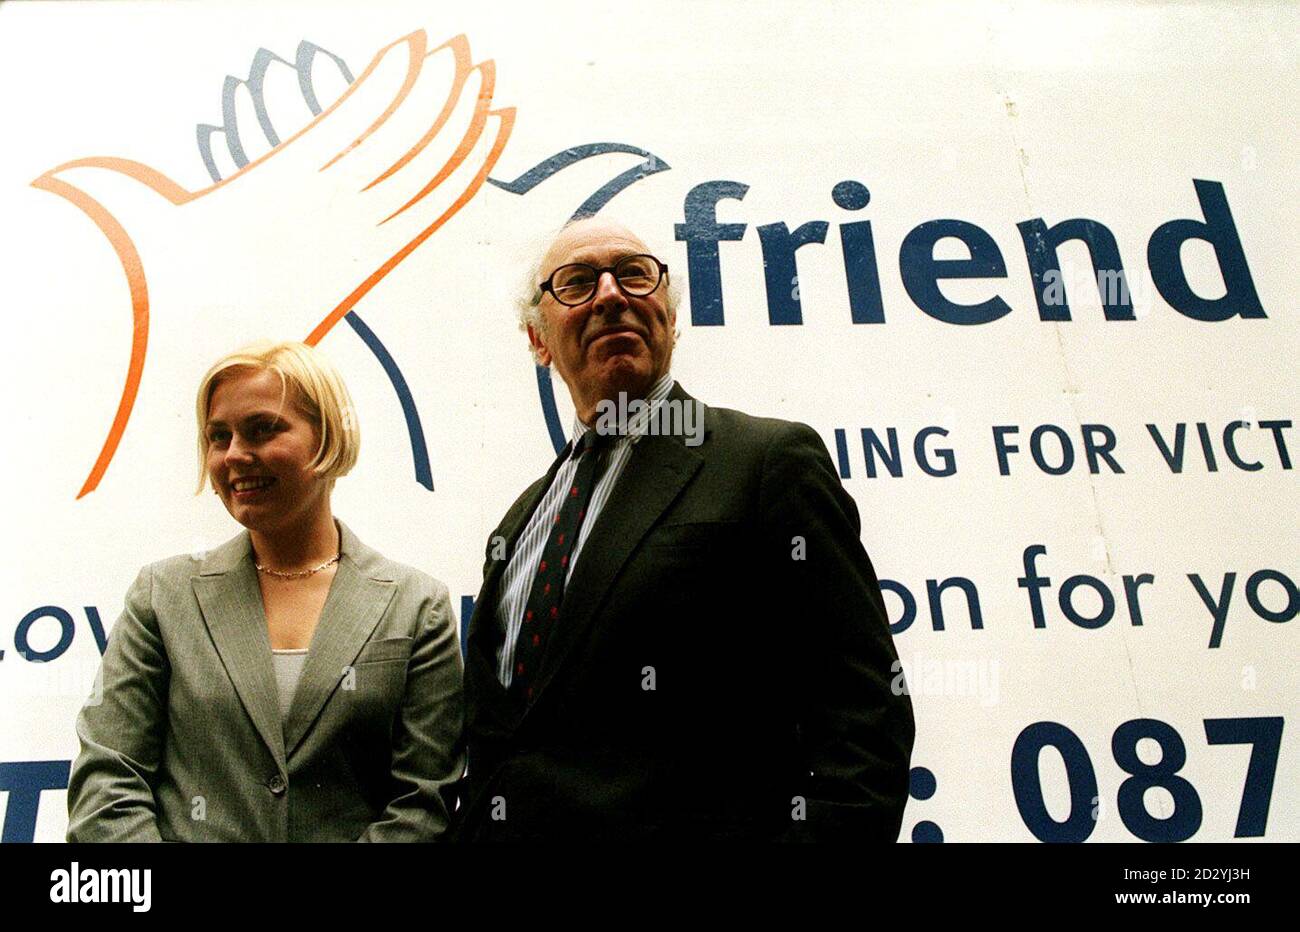 PA NEWS PHOTO 14/4/98  LISA POTTS THE FORMER NURSERY NURSE WHO WAS INJURED AS SHE HEROICALLY PROTECTED HER PUPILS FROM A VIOLENT ATTACKER WIELDING A MACHETE LAUNCHES A NEW INSURANCE PACKAGE FOR VICTIMS OF VIOLENT CRIME 'FRIEND INDEED' IN LONDON WITH SIR LOUIS BLOM-COOPER Stock Photo